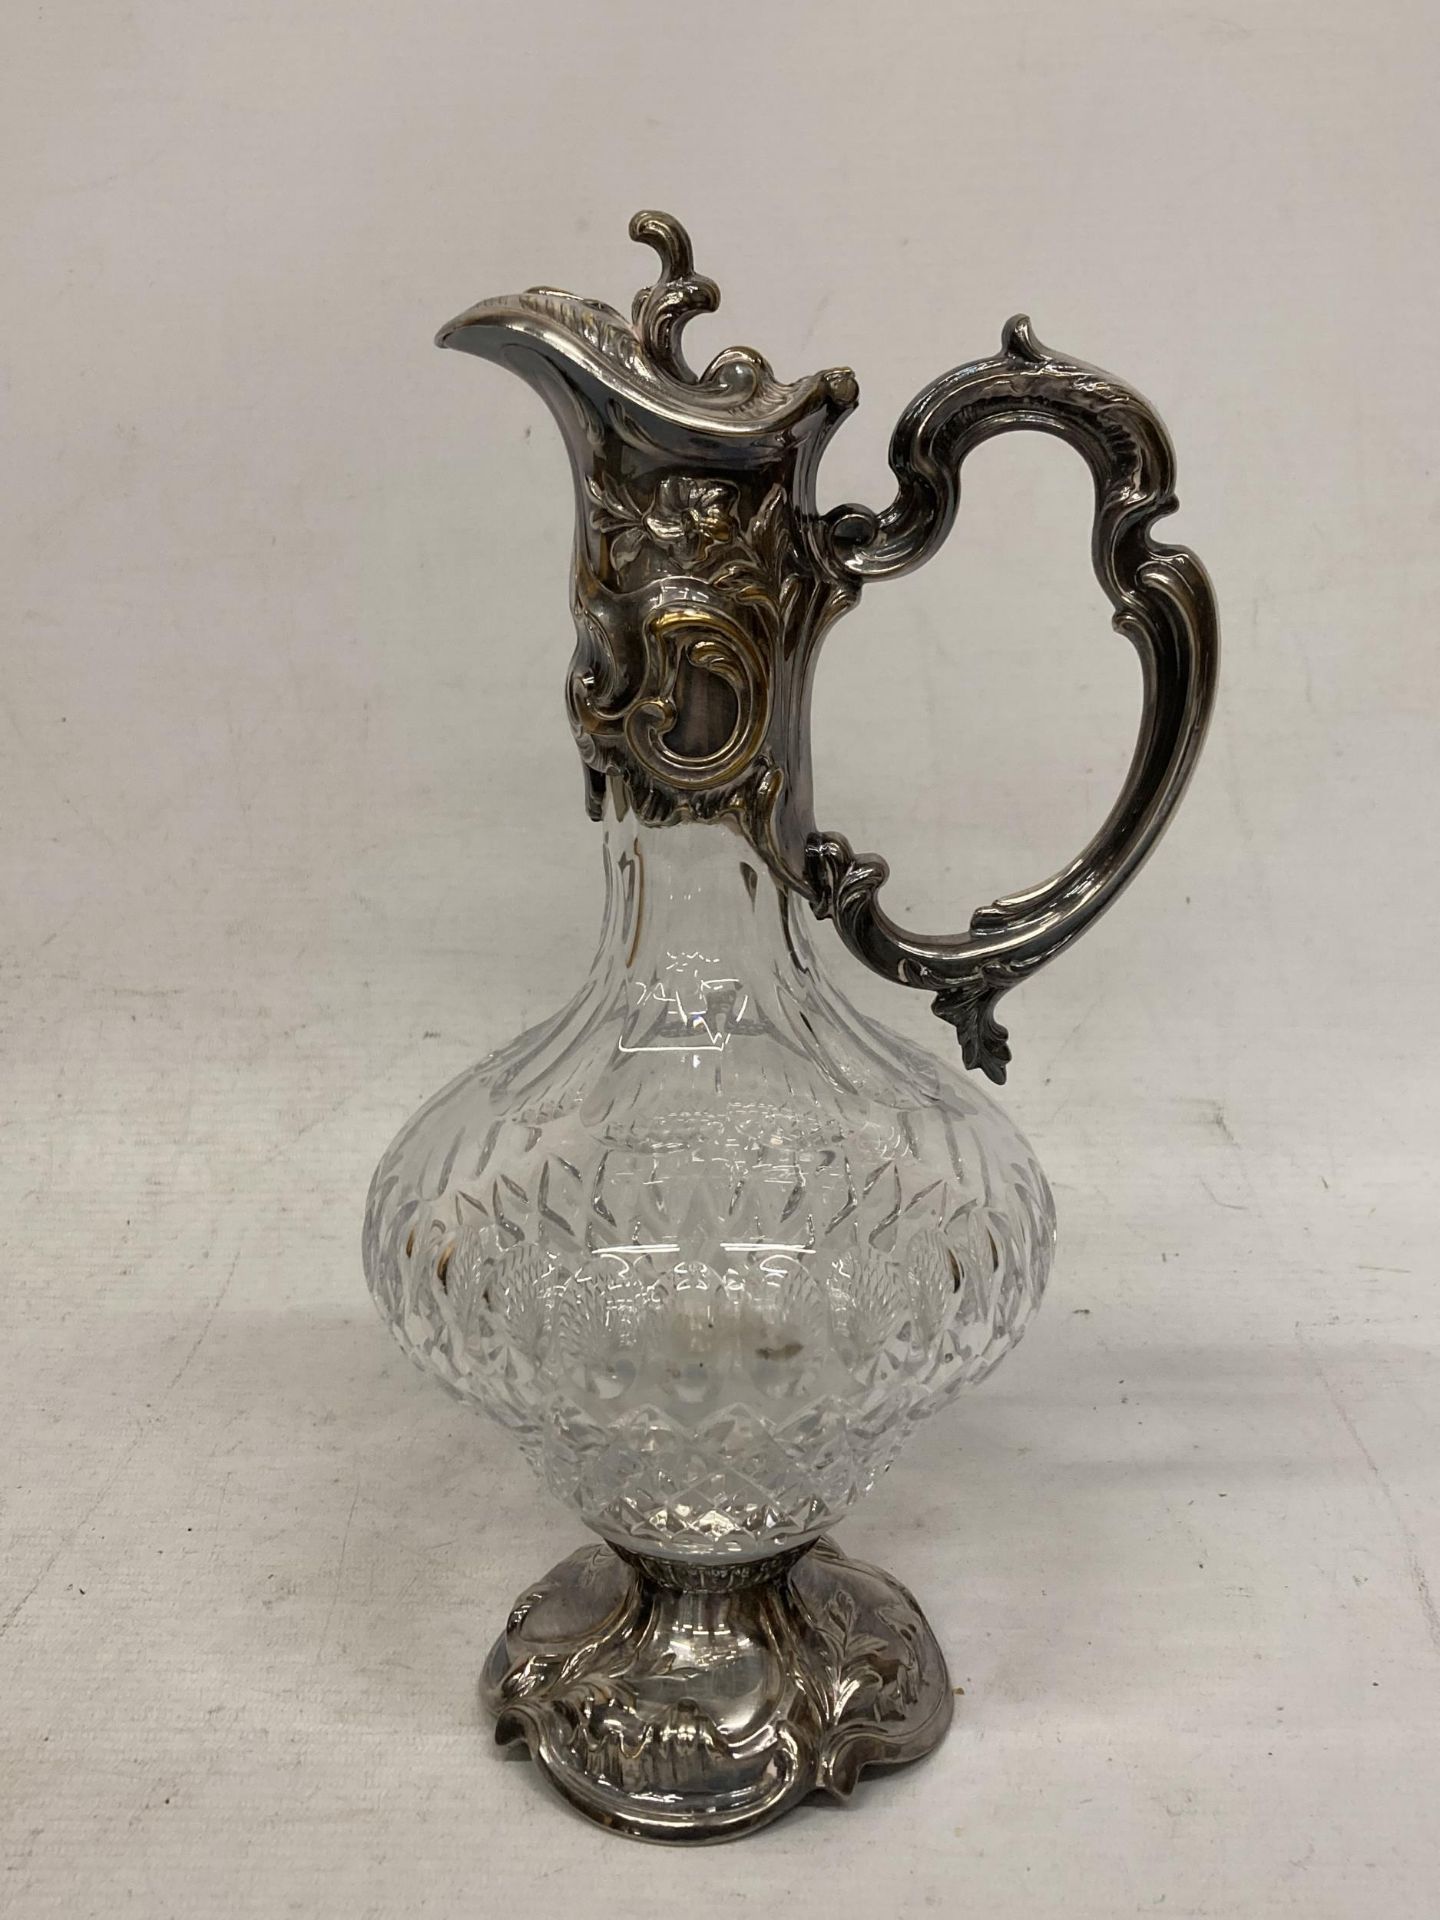 AN ORNATE SILVER PLATED AND CUT GLASS CLARET JUG